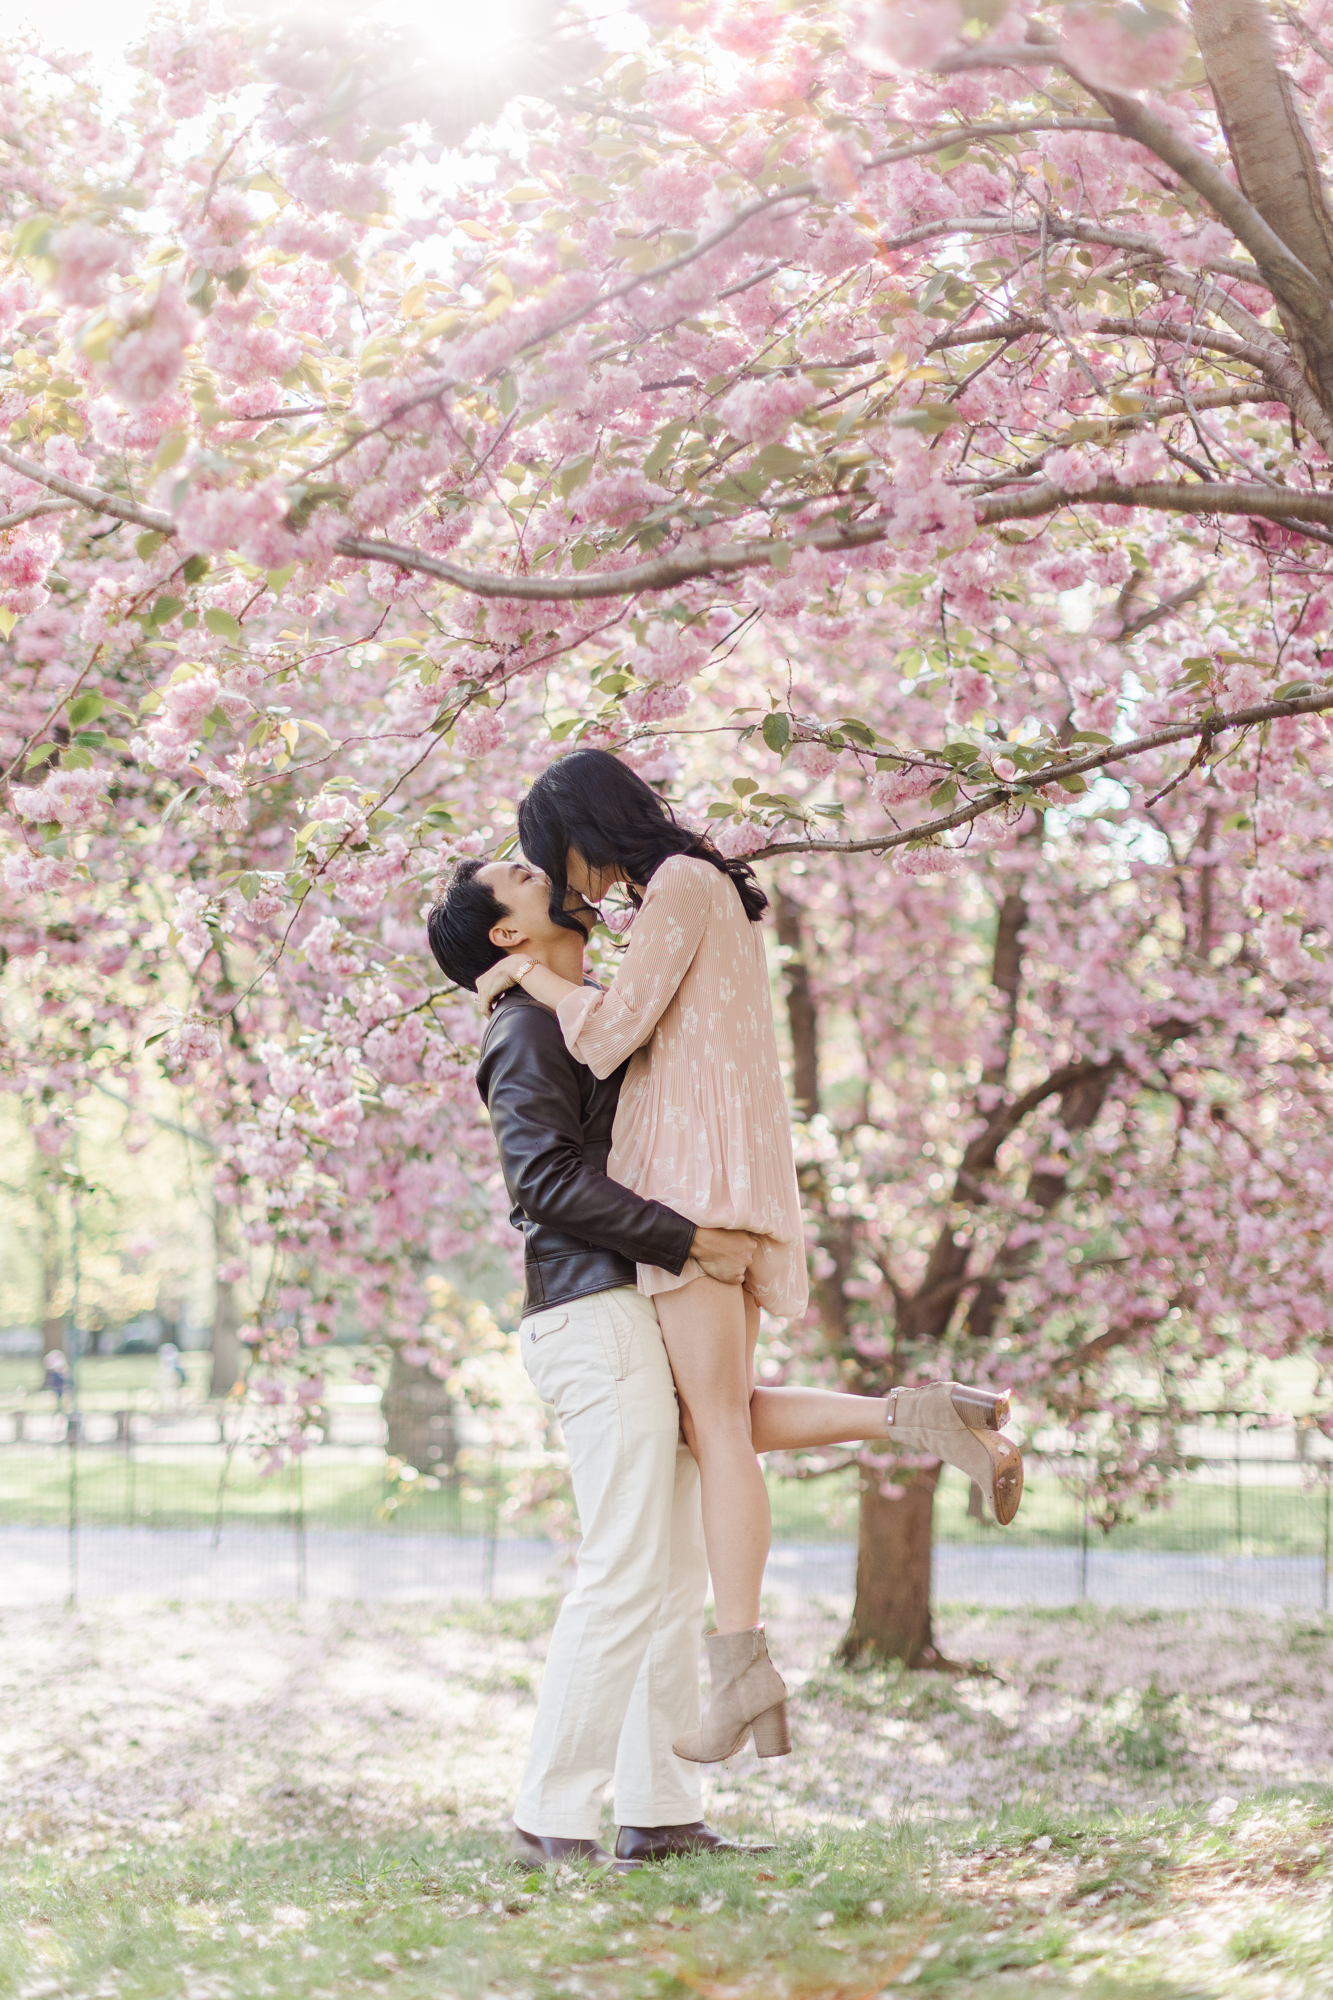 Sensational Engagement Photos With Cherry Blossoms in NYC